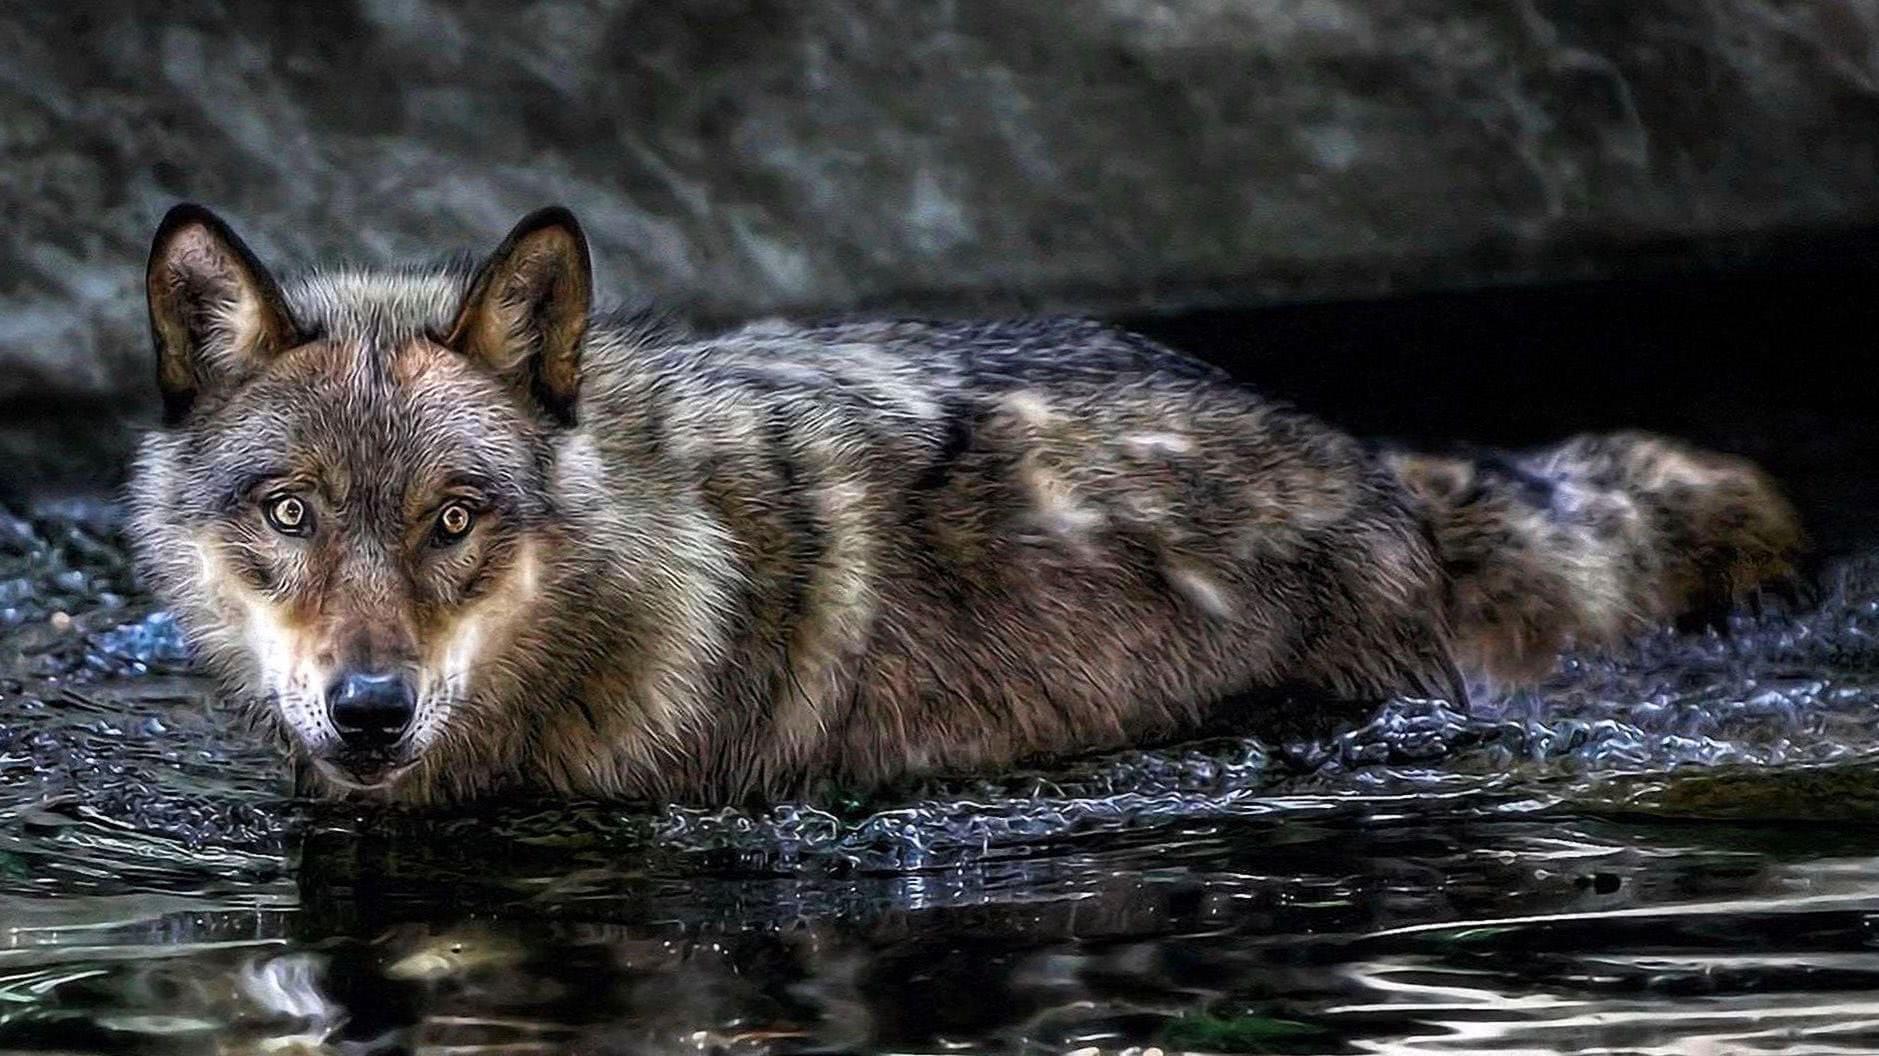 HD Wallpapers 1080p Wolves